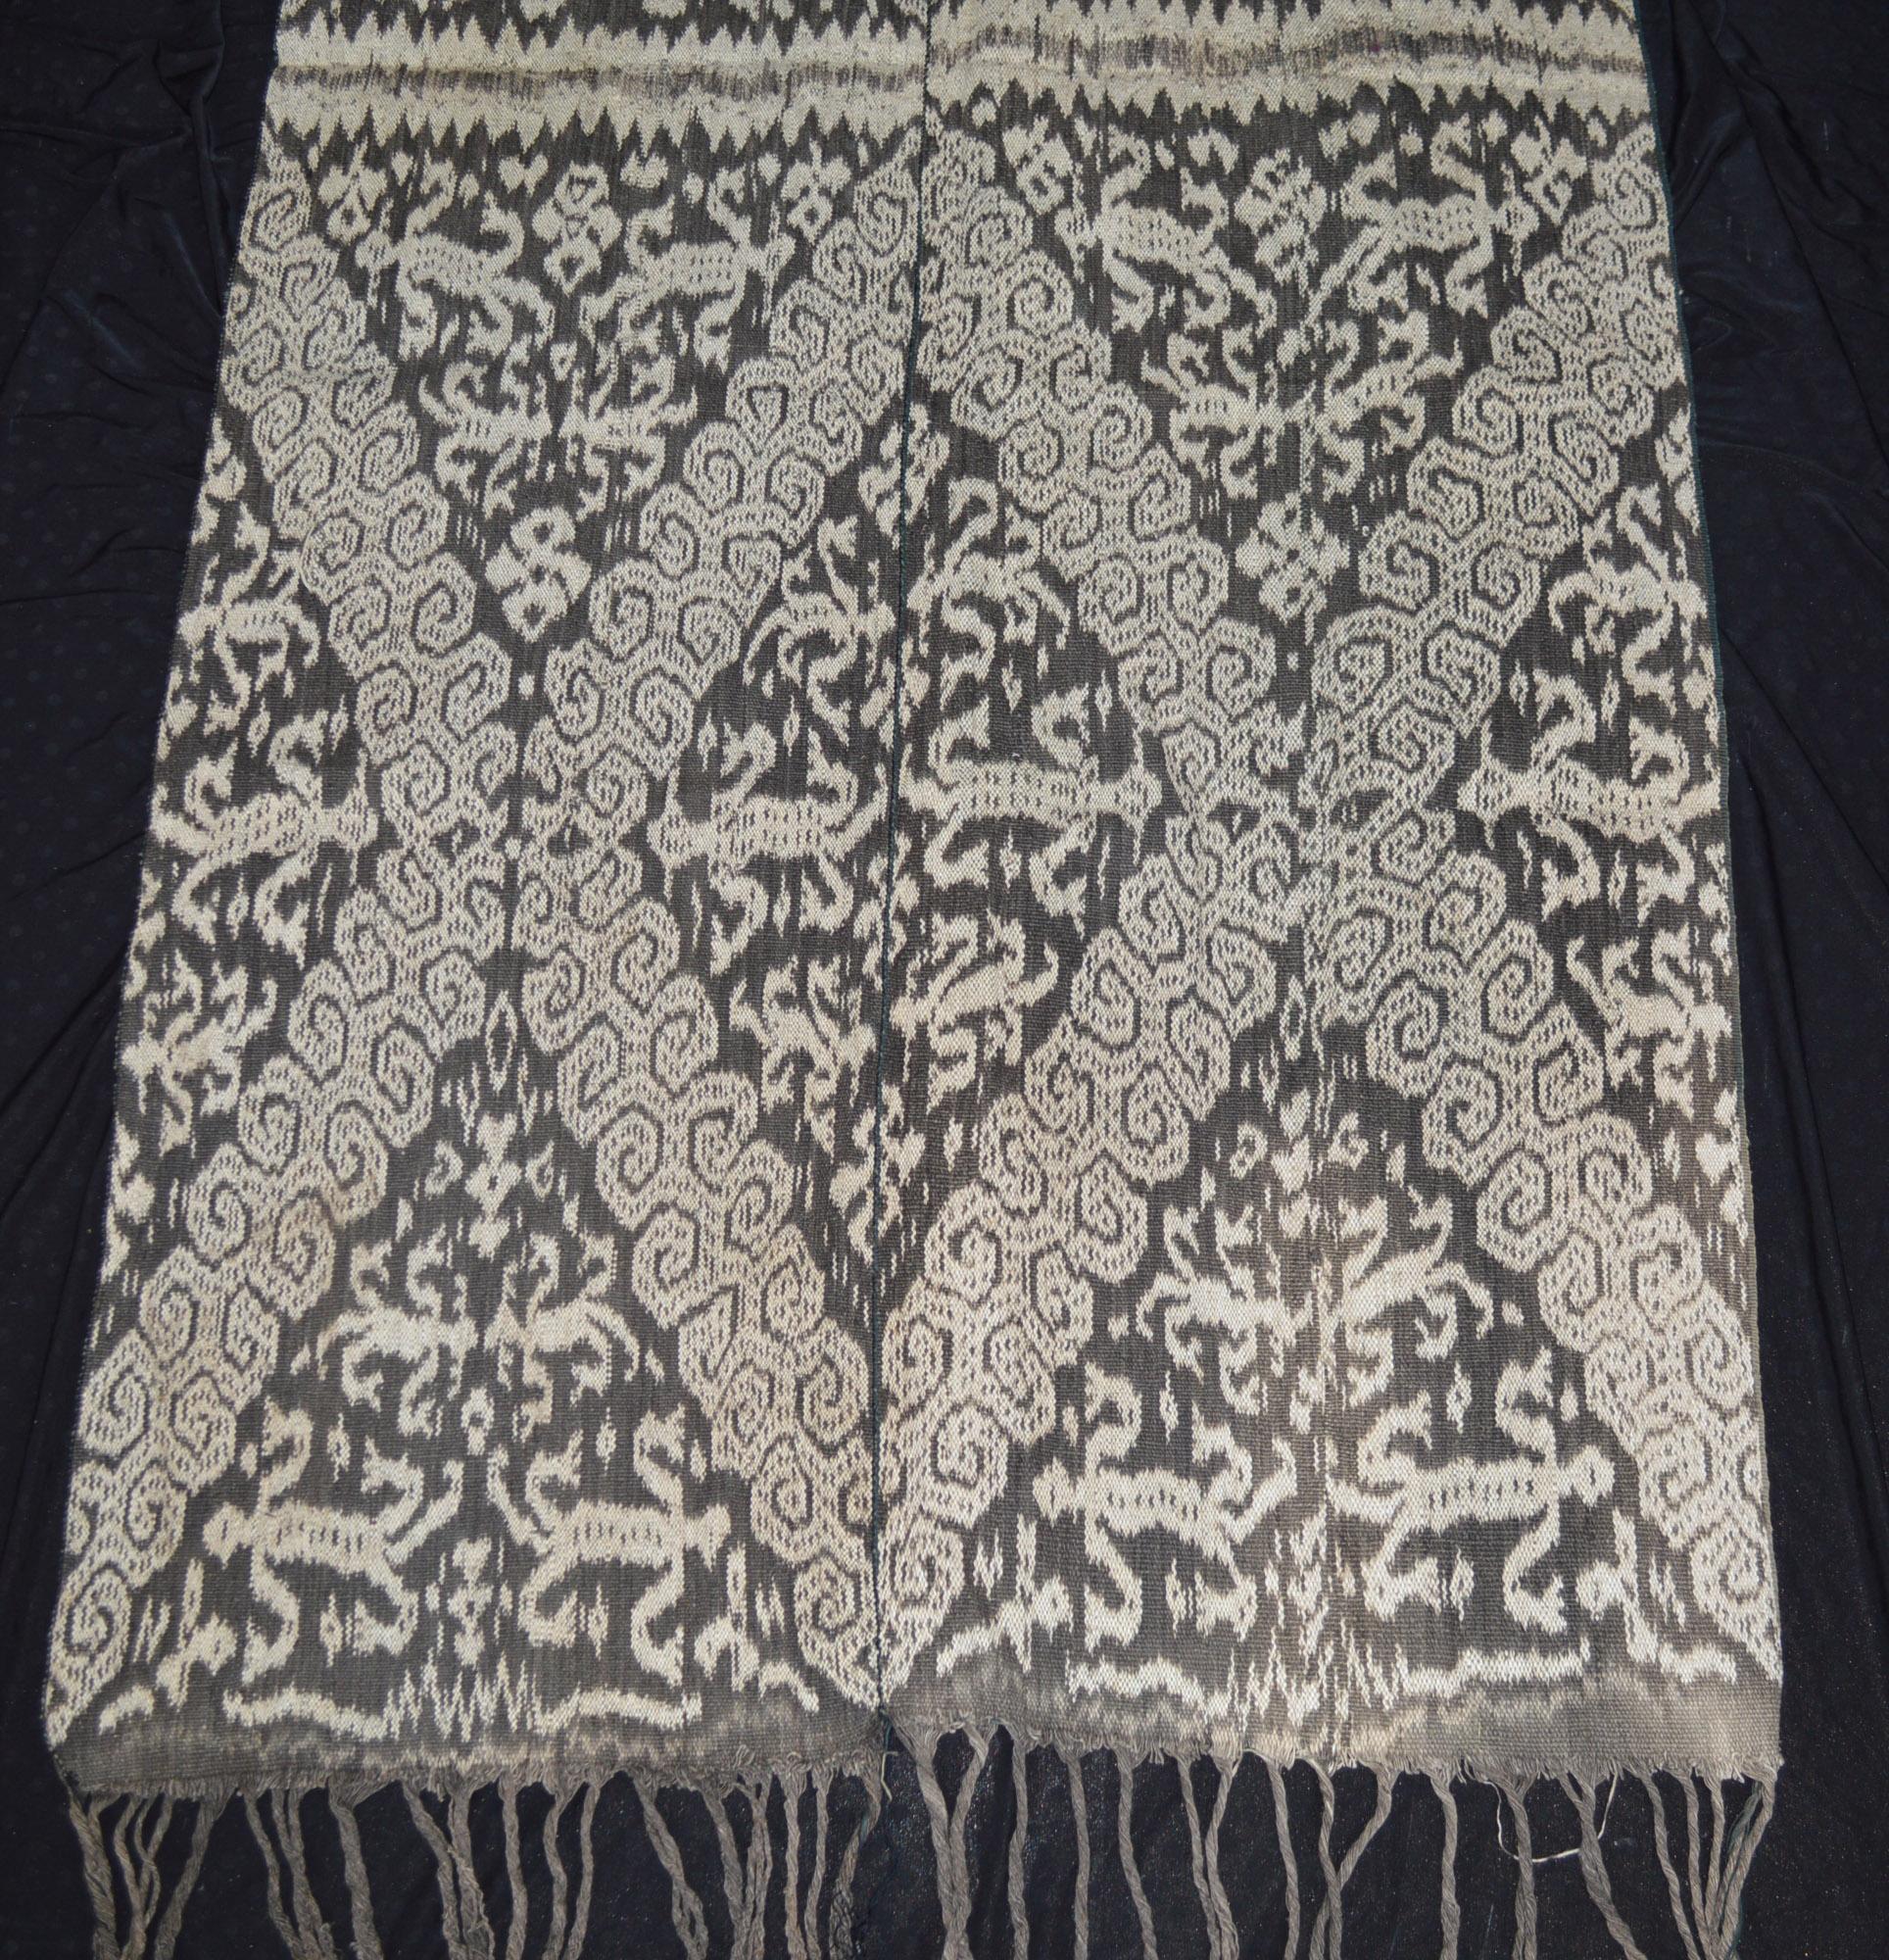 A Vintage woven Ikat cloth made using hand spun natural dyed cotton yarn on the island of Timor in Indonesia.

Comprising of 2 panels sewn together to form a larger cloth a technique often used in older ikat textiles from the region.
Featuring a